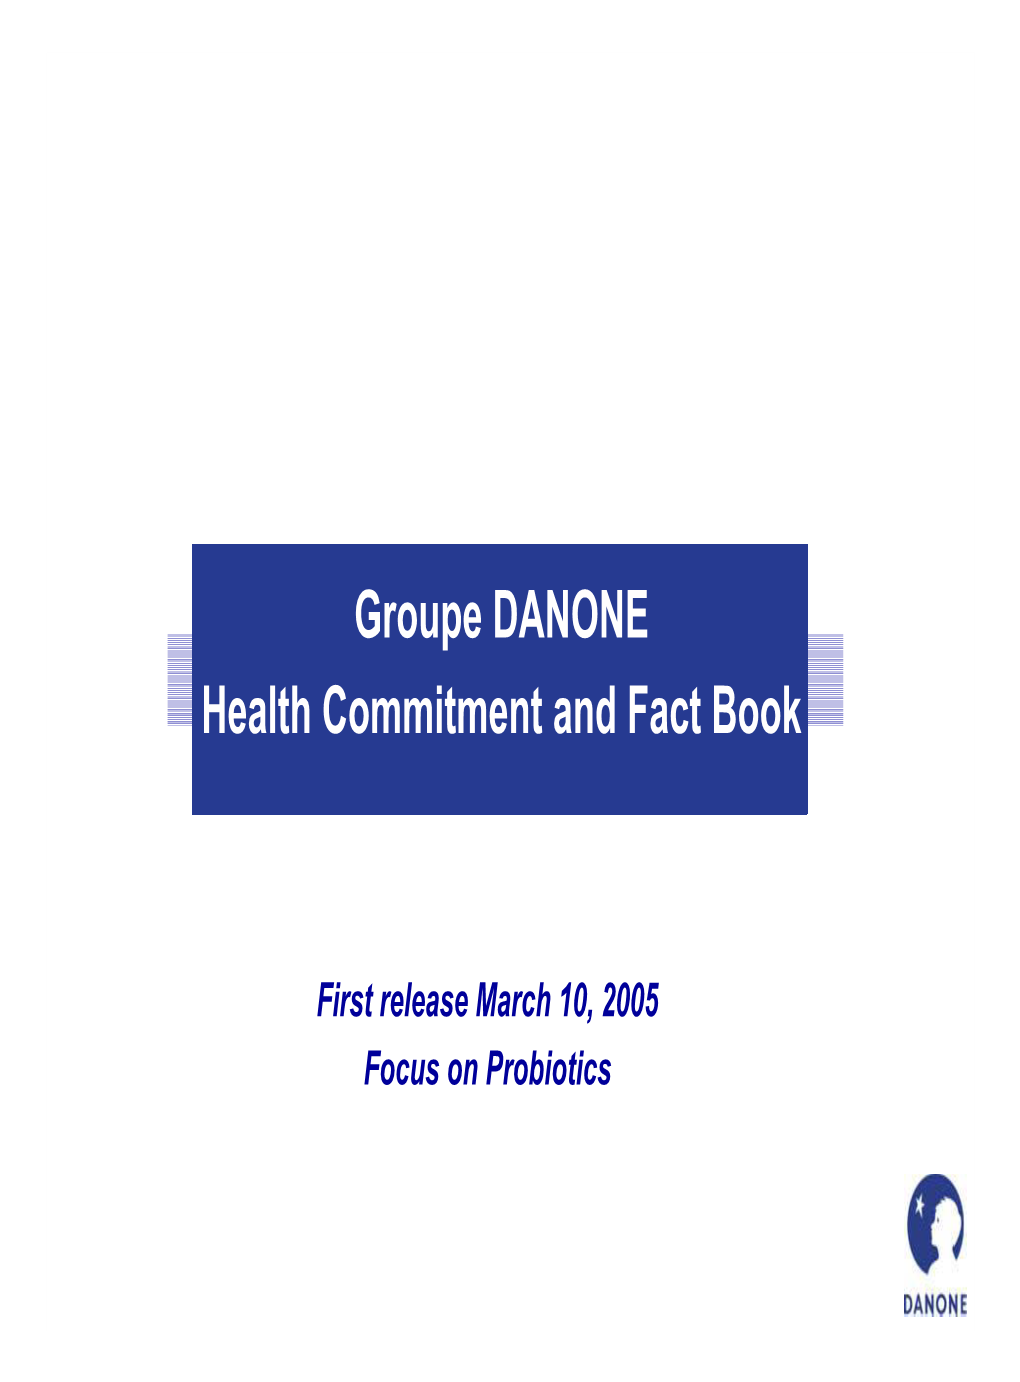 Groupe DANONE Health Commitment and Fact Book